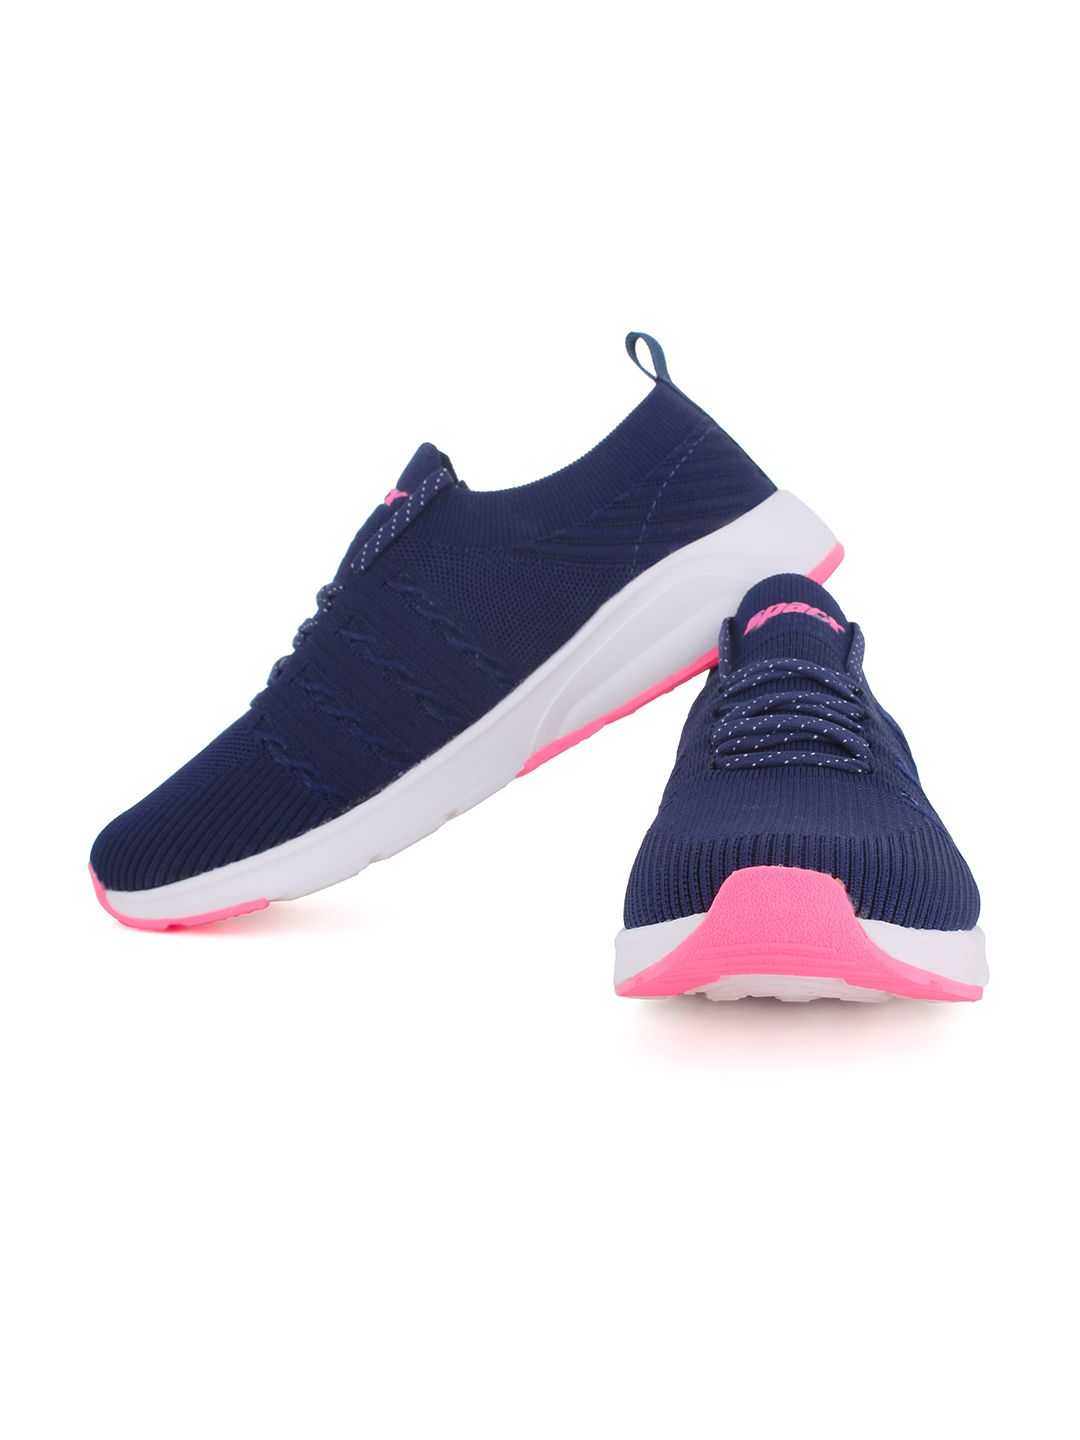 Sparx Women Navy Blue Mesh Running Non-Marking Shoes Price in India